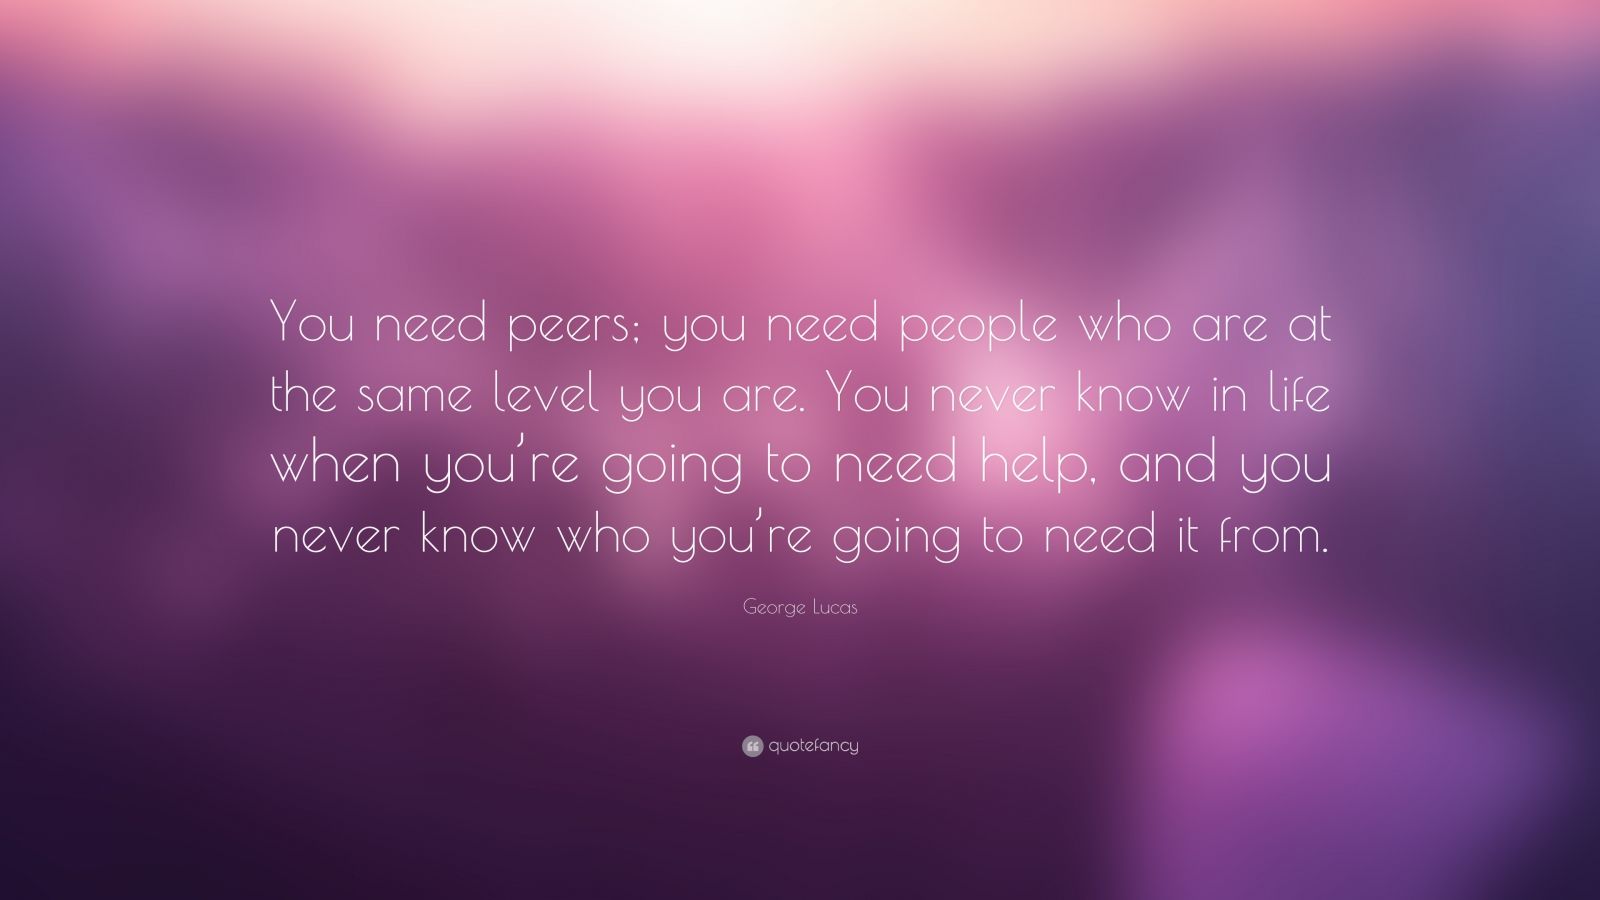 George Lucas Quote: “You need peers; you need people who are at the ...